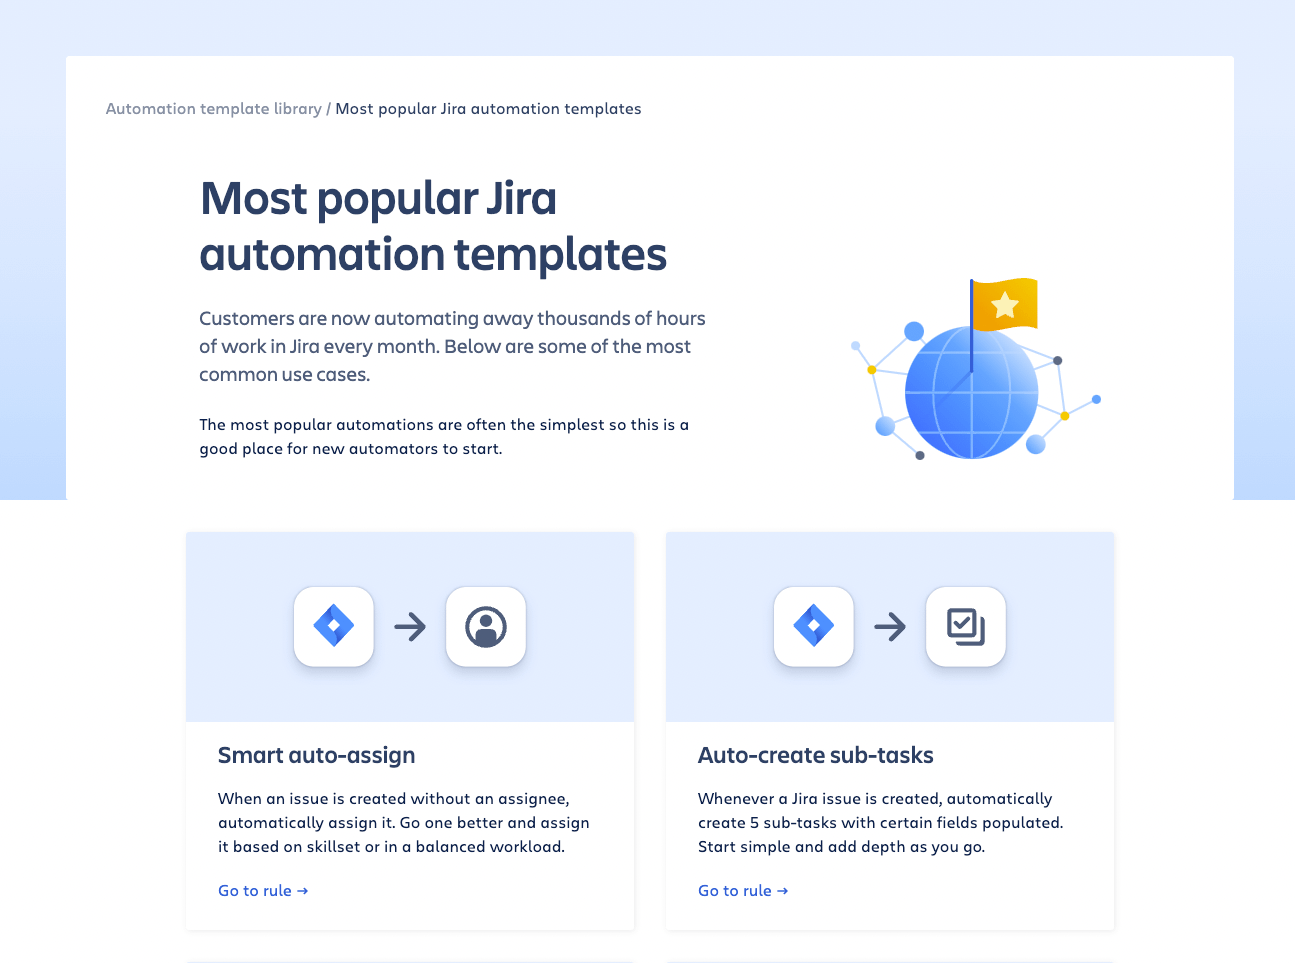 Smart auto assign and round robin are among the most popular Jira automation templates